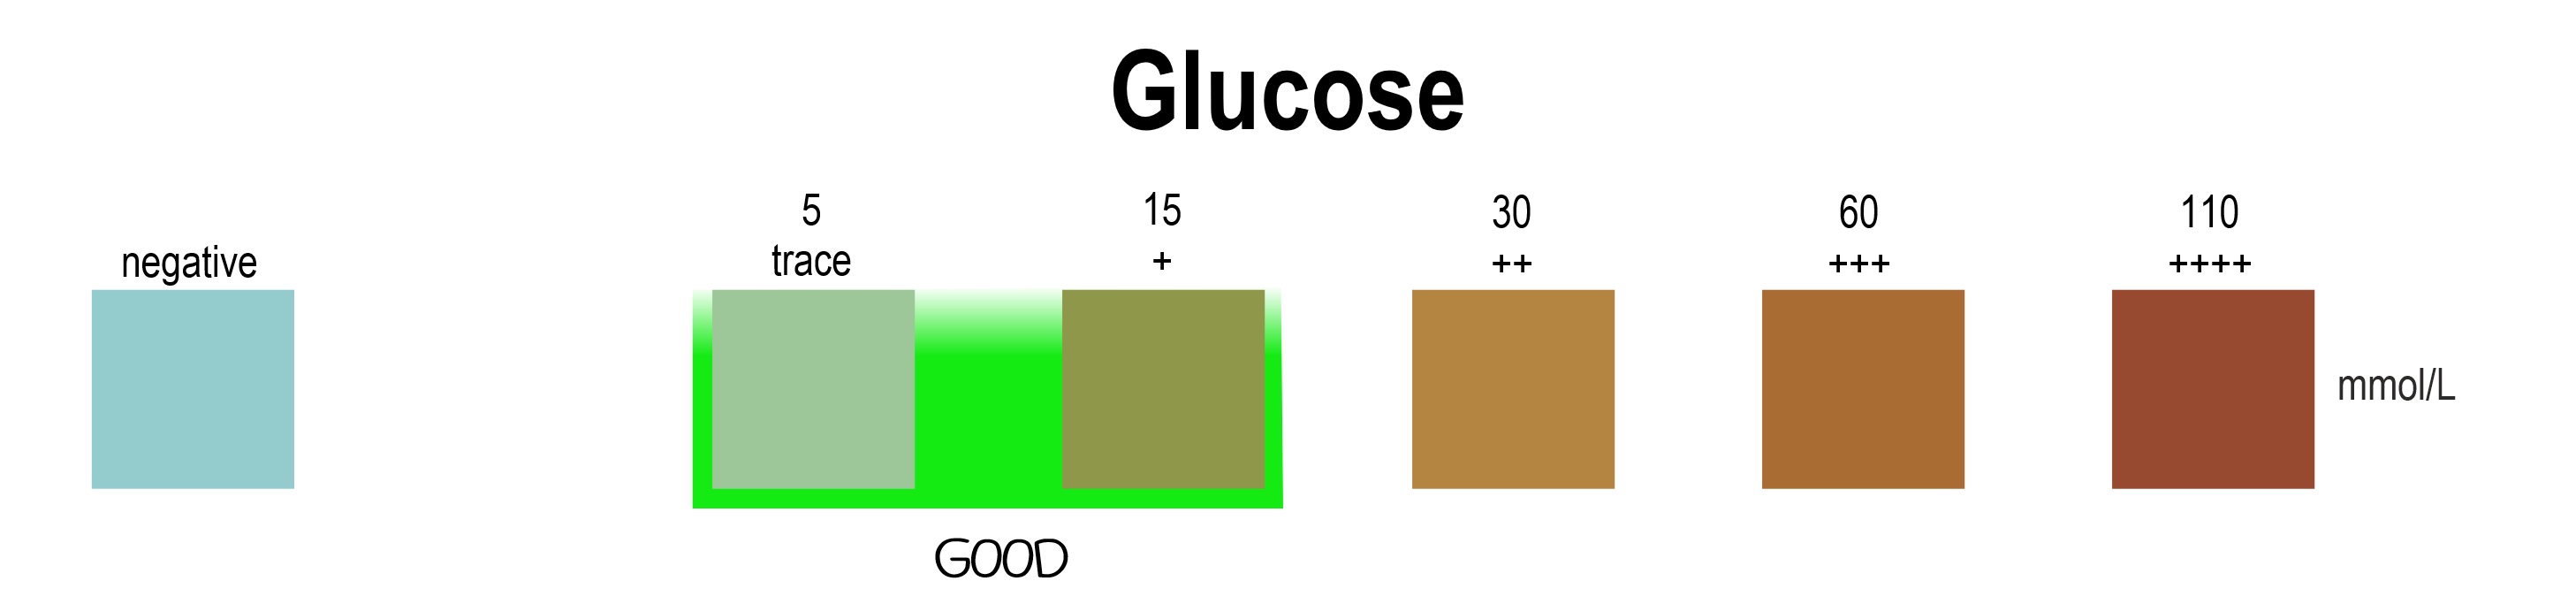 How to Read Urine Test Strips - Glucose for blog mtm